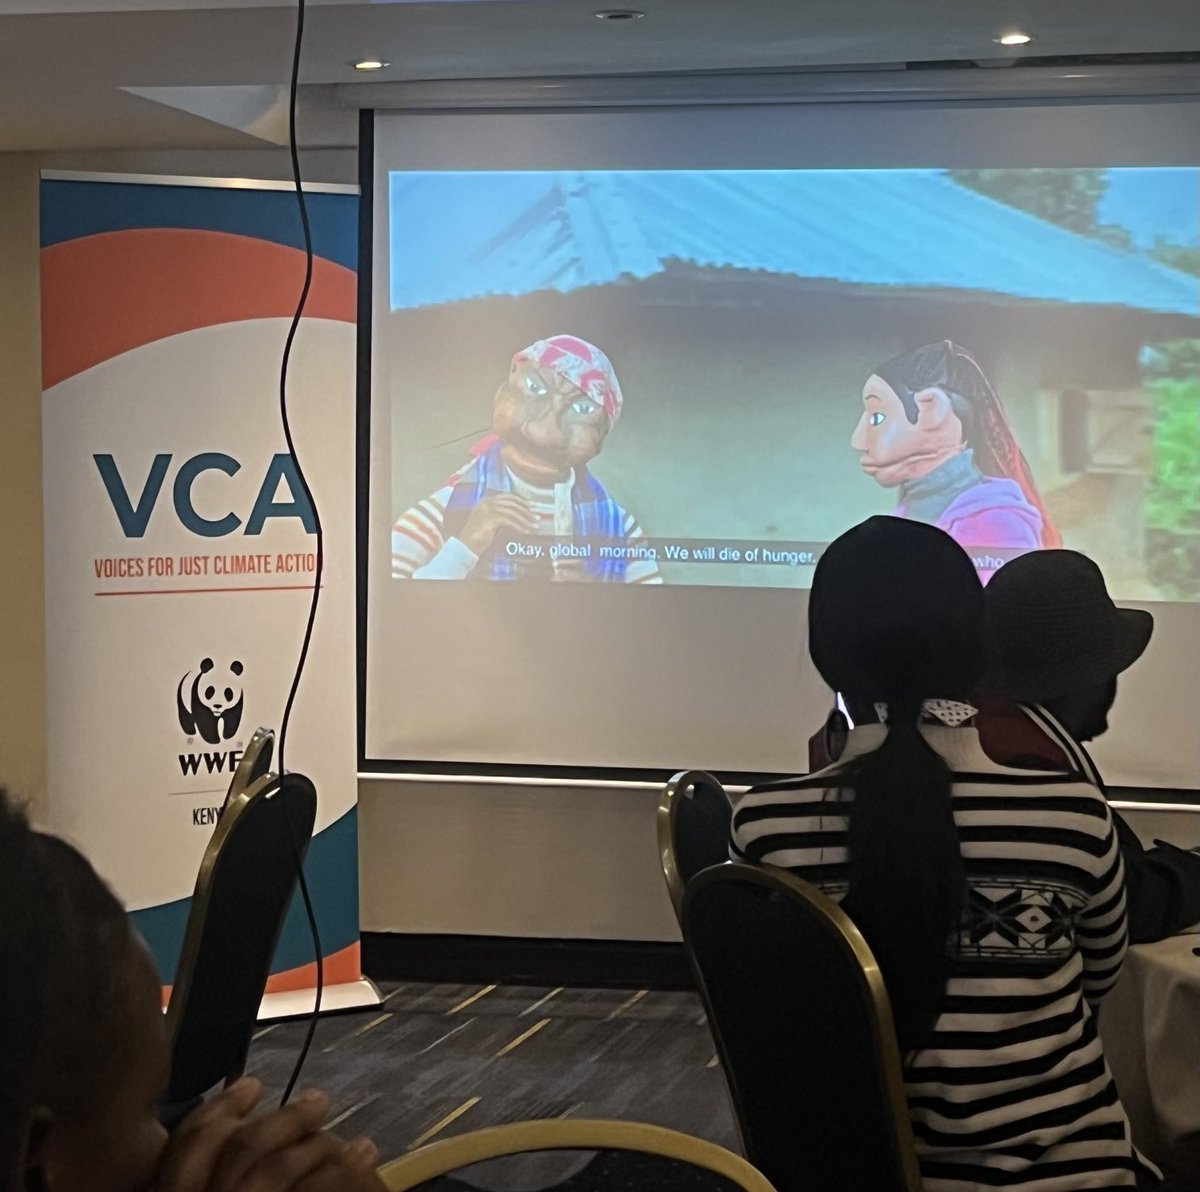 The super creative @kenya_puppet starts the @WeAreVCA Comms training Day 2 with a hilarious yet informative performance.

A well-stitched puppetry piece that left viewers in stitches! 

#WeAreVCA   #ClimateStories